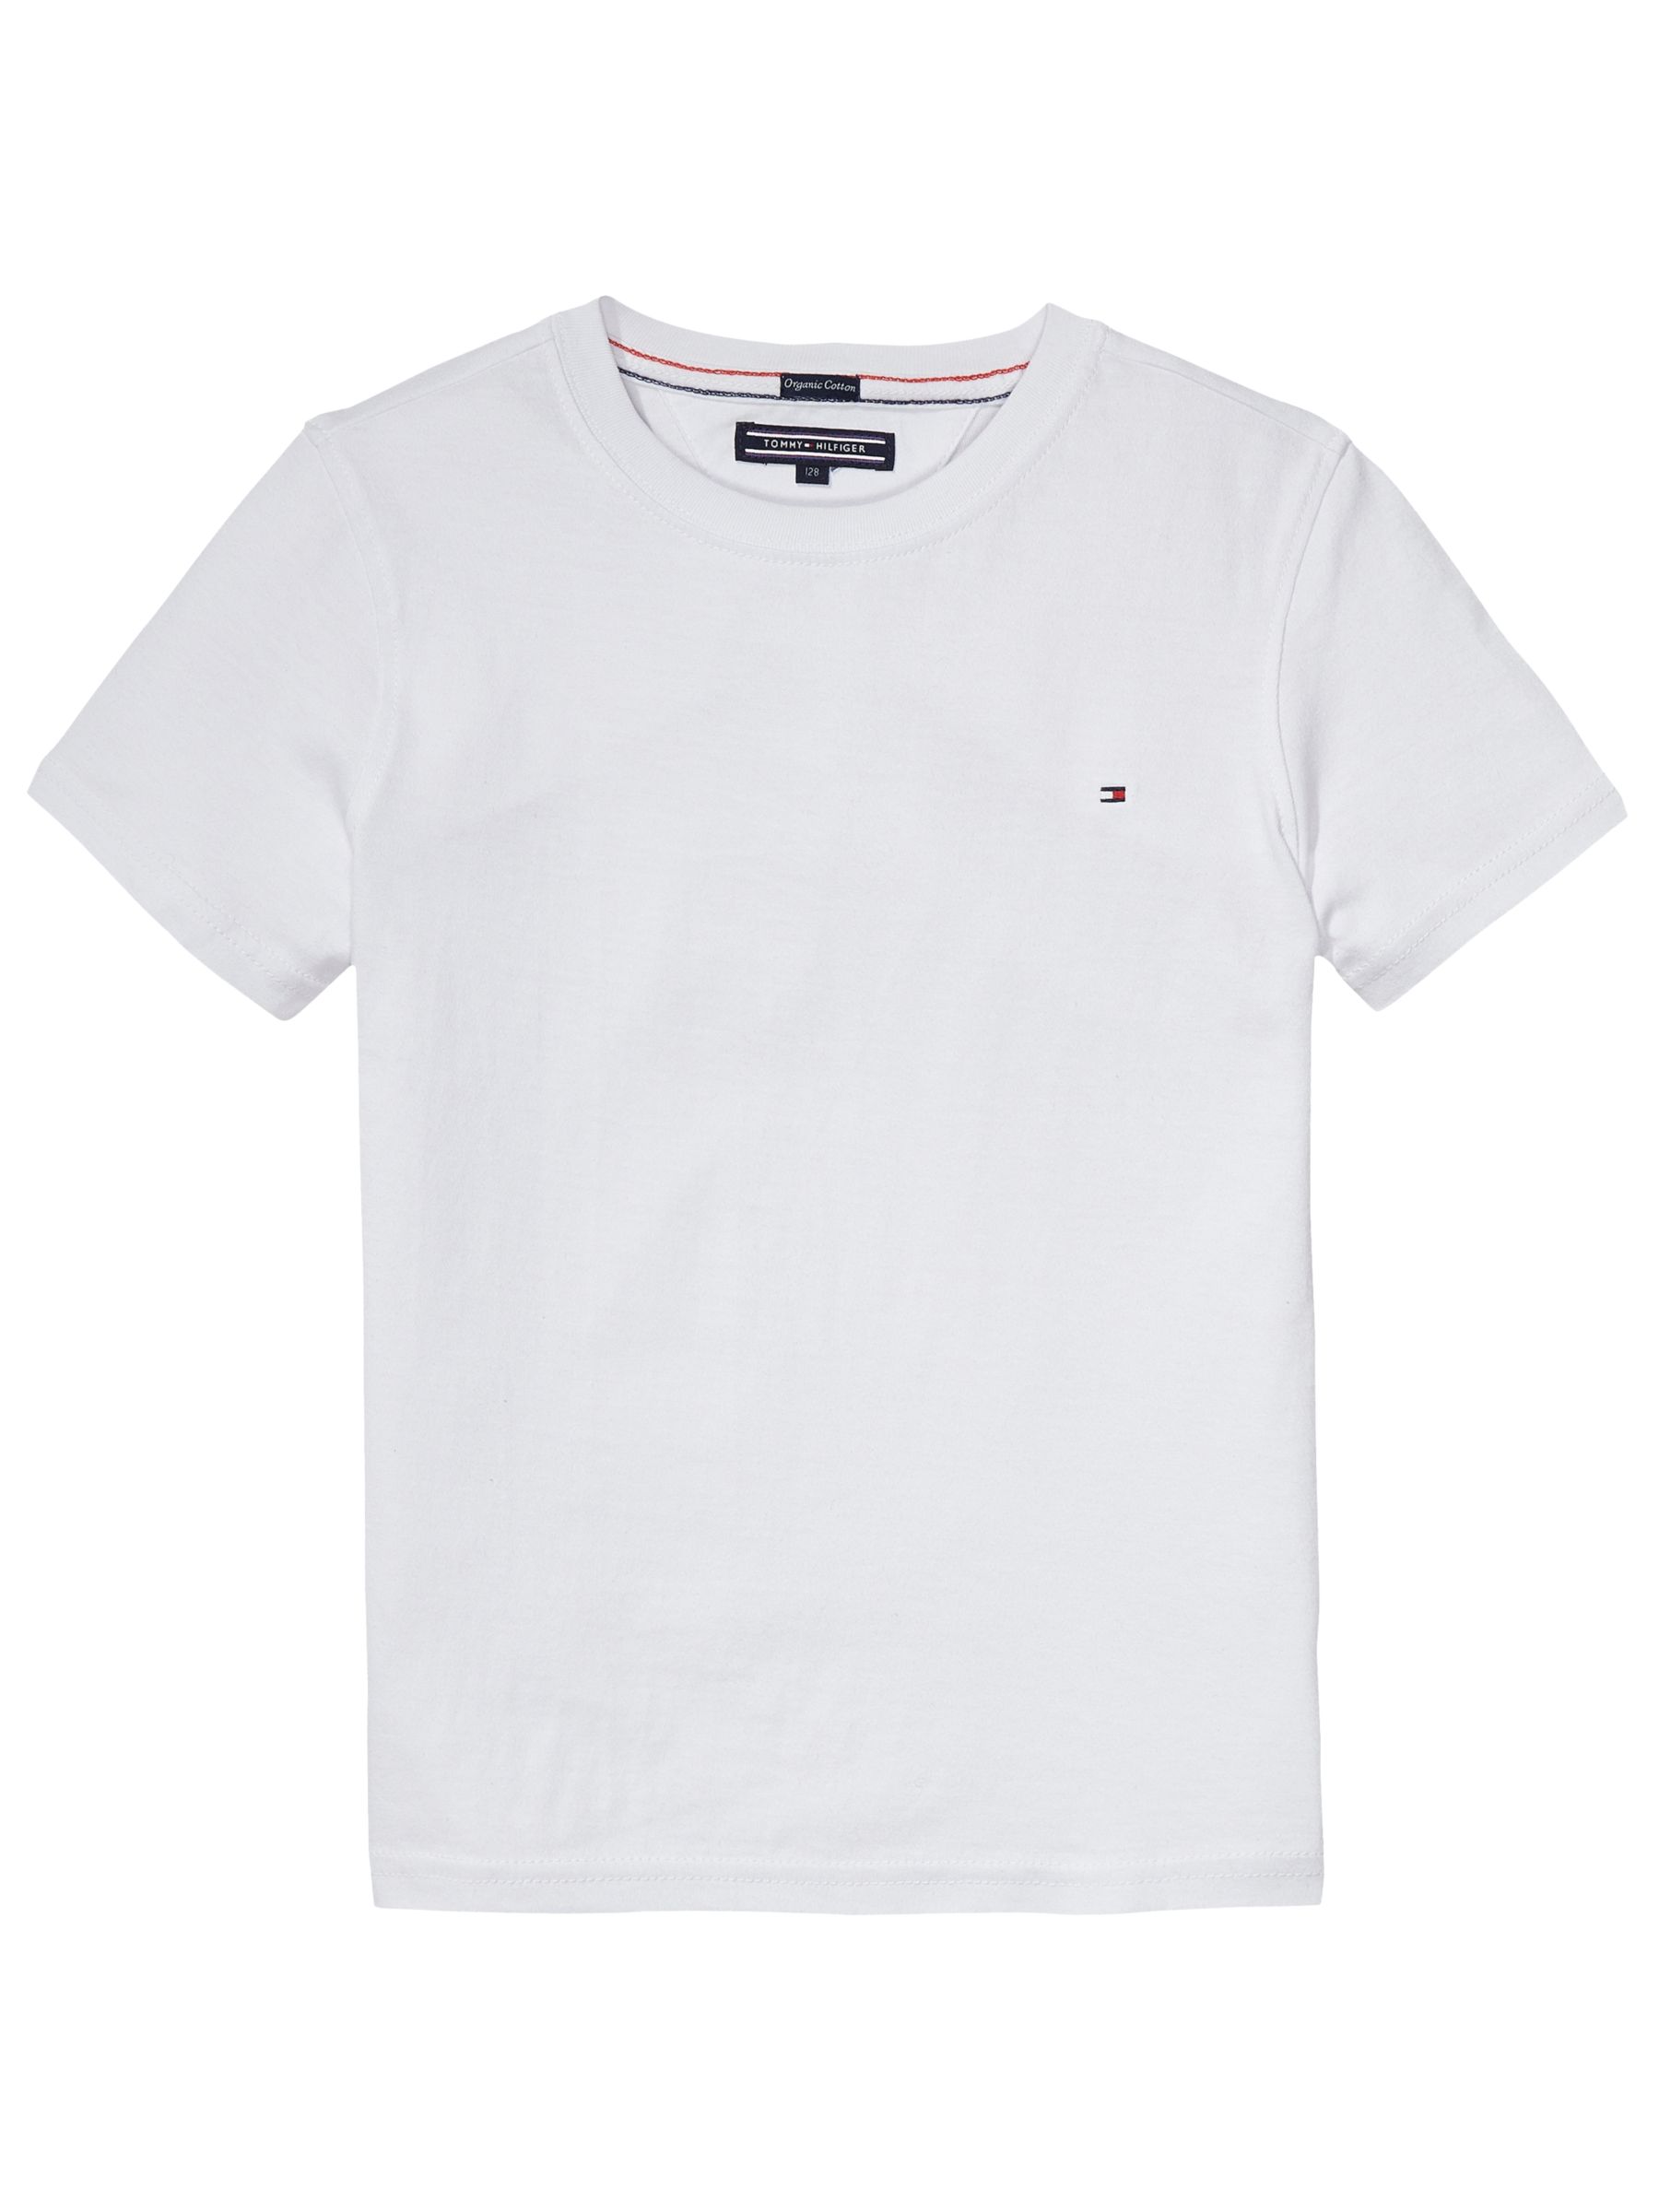 tommy t shirt white